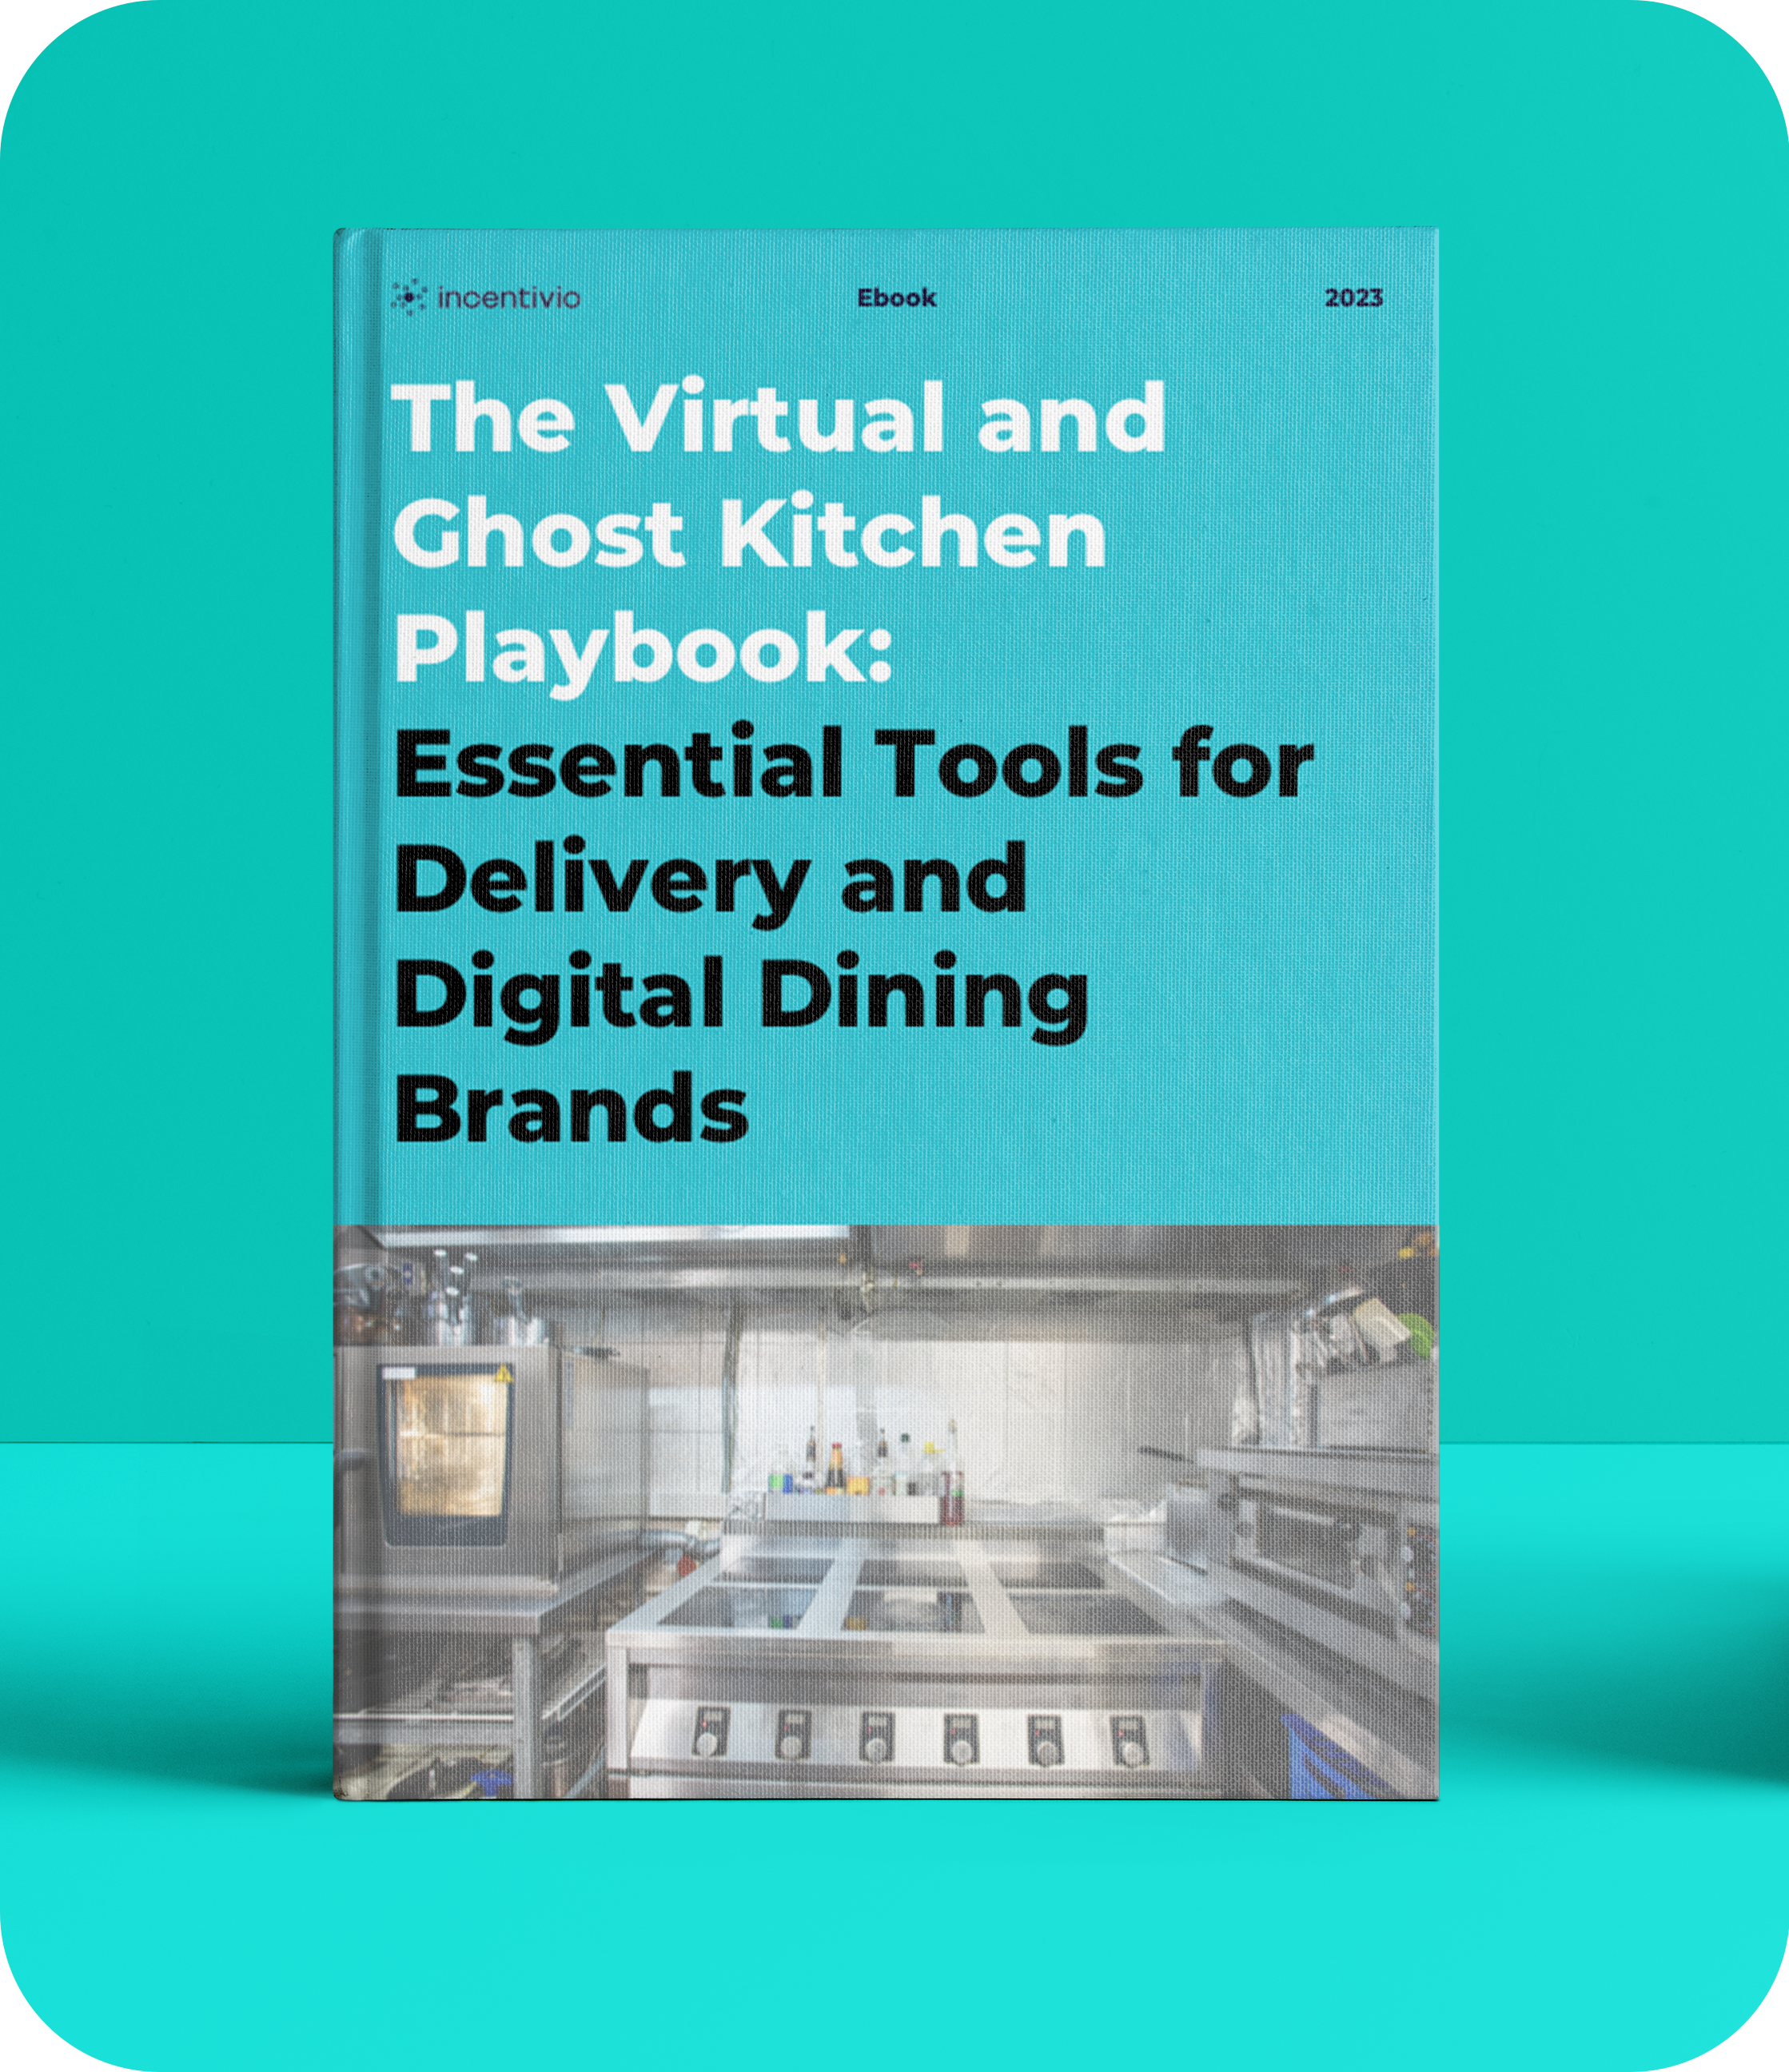 An image of a virtual kitchen and ghost kitchen ultimate guide for restaurants.